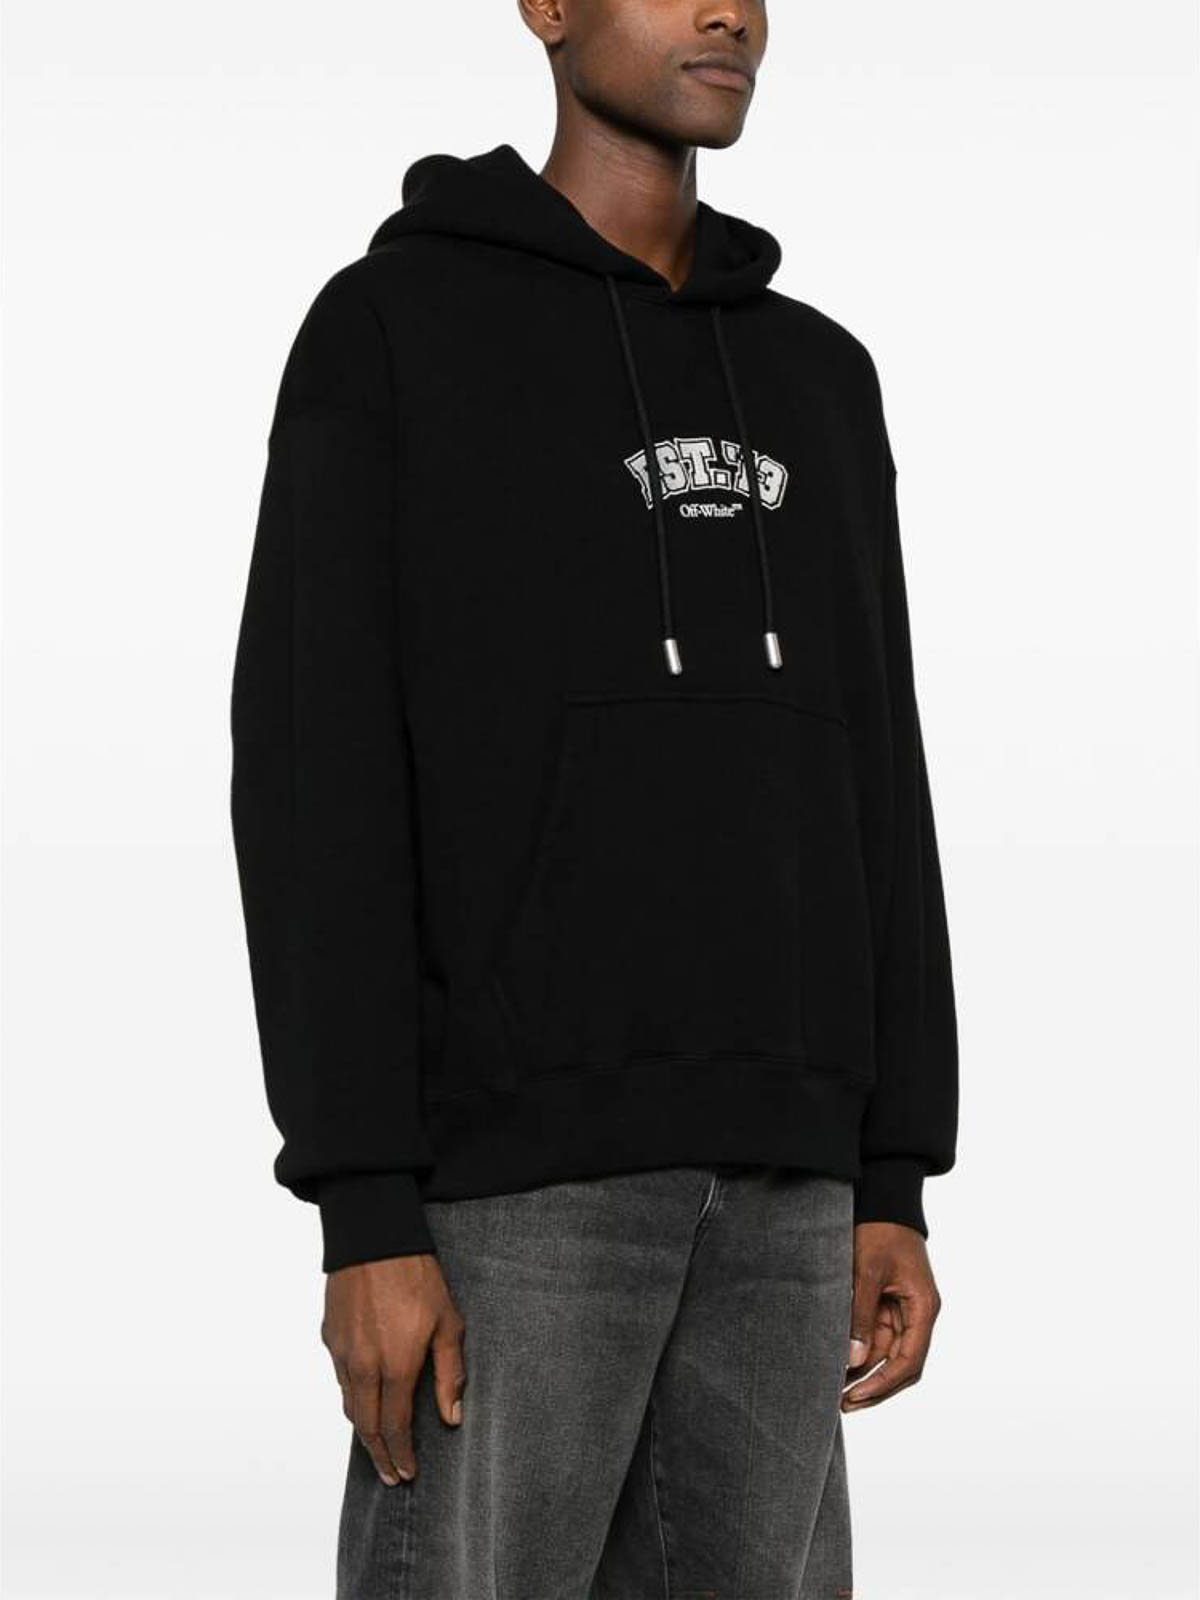 Shop Off-white Black Embroidered Graphic Hoodie